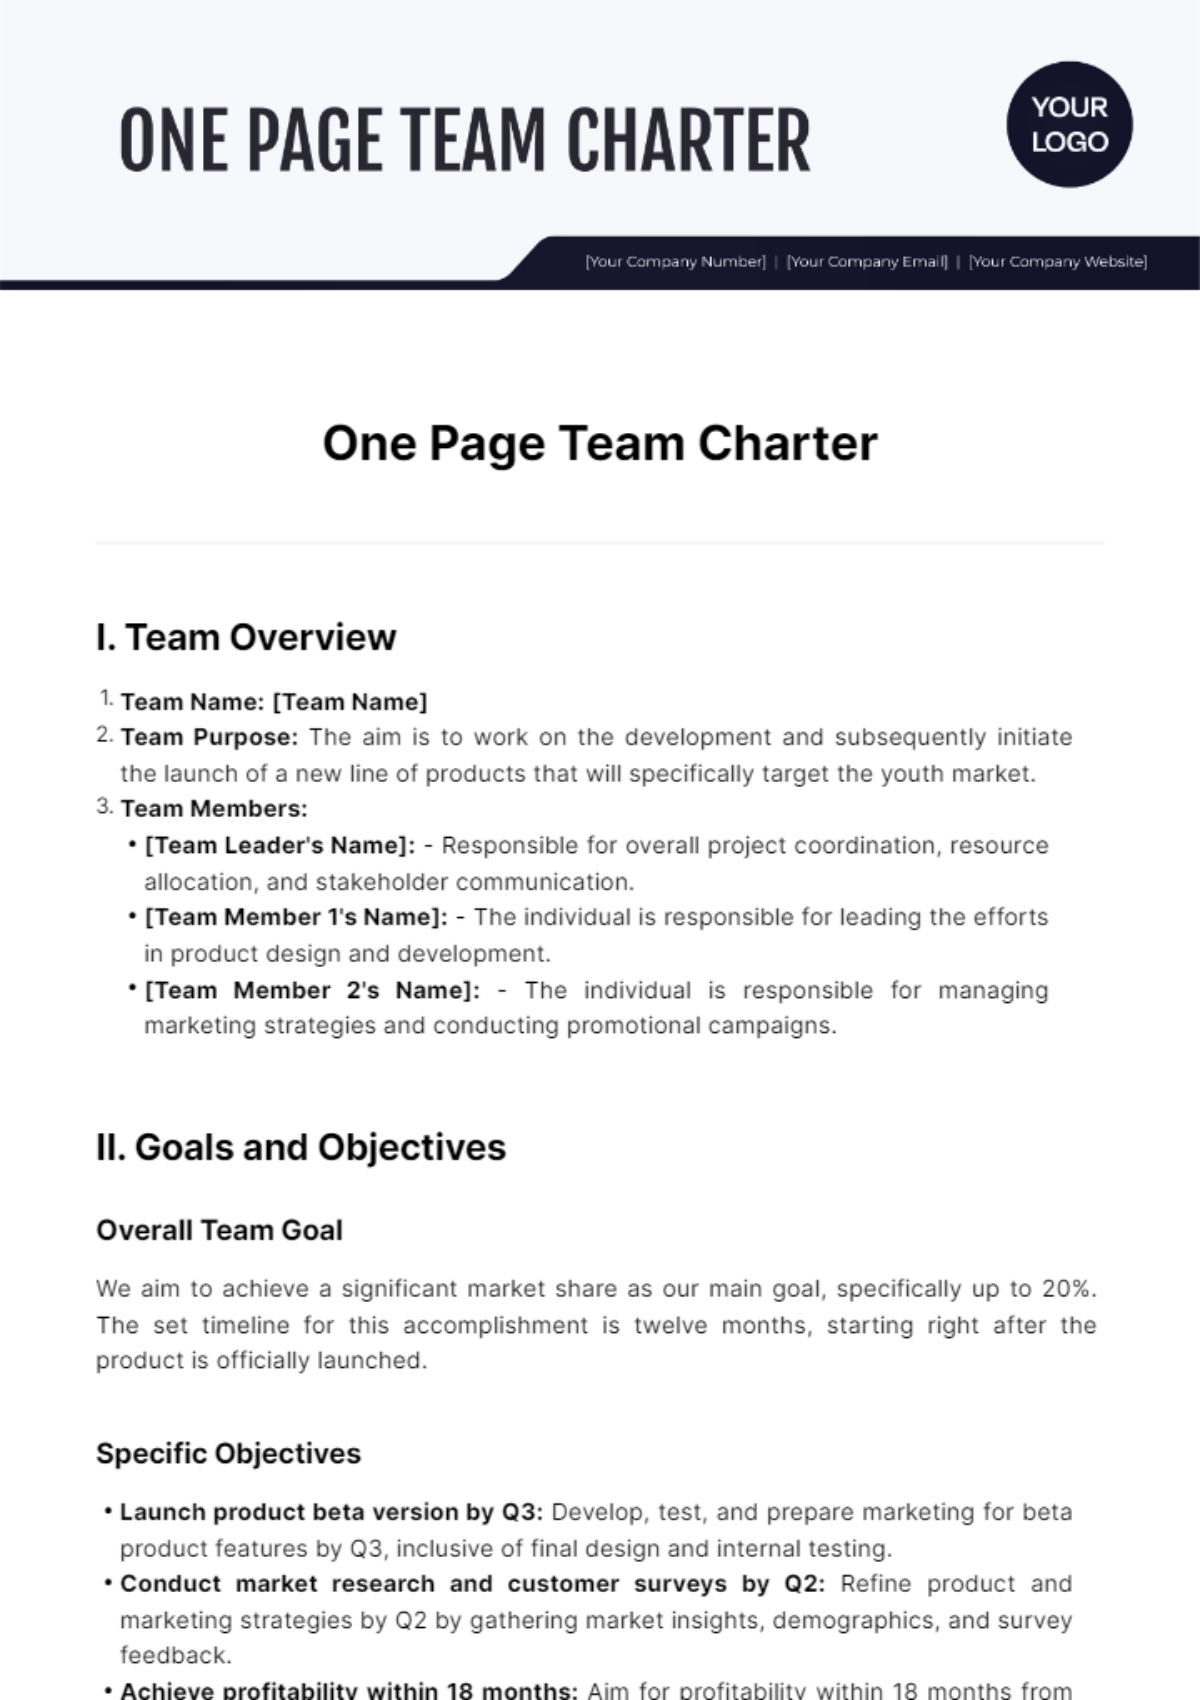 One Page Team Charter Template